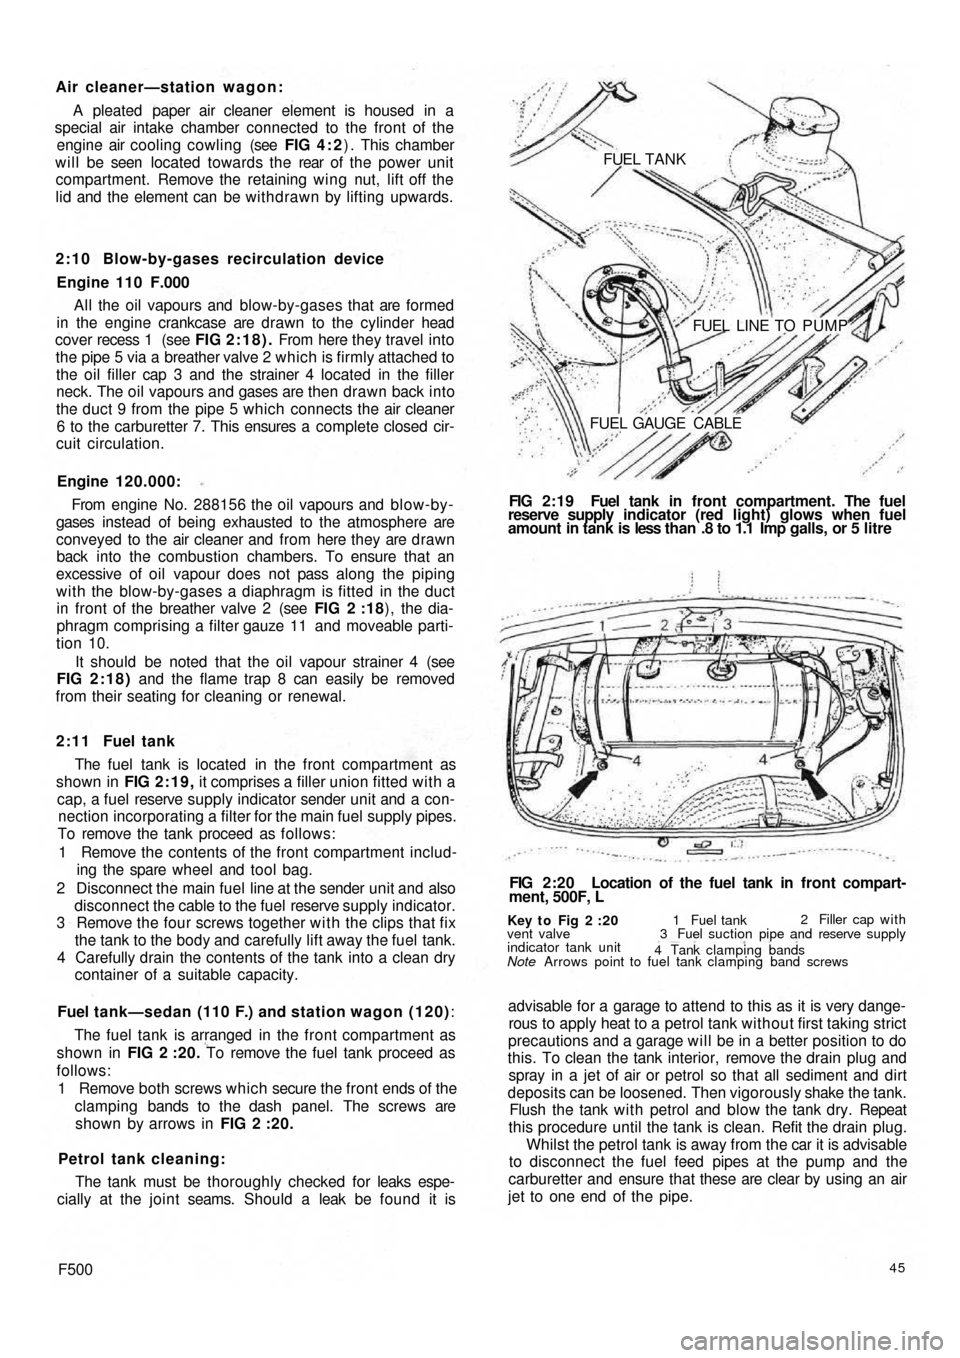 FIAT 500 1970 1.G Workshop Manual Air cleaner—station wagon:
A pleated paper air cleaner element is housed  in a
special air intake chamber connected to the front of the
engine air cooling cowling (see FIG 4 : 2) . This chamber
will